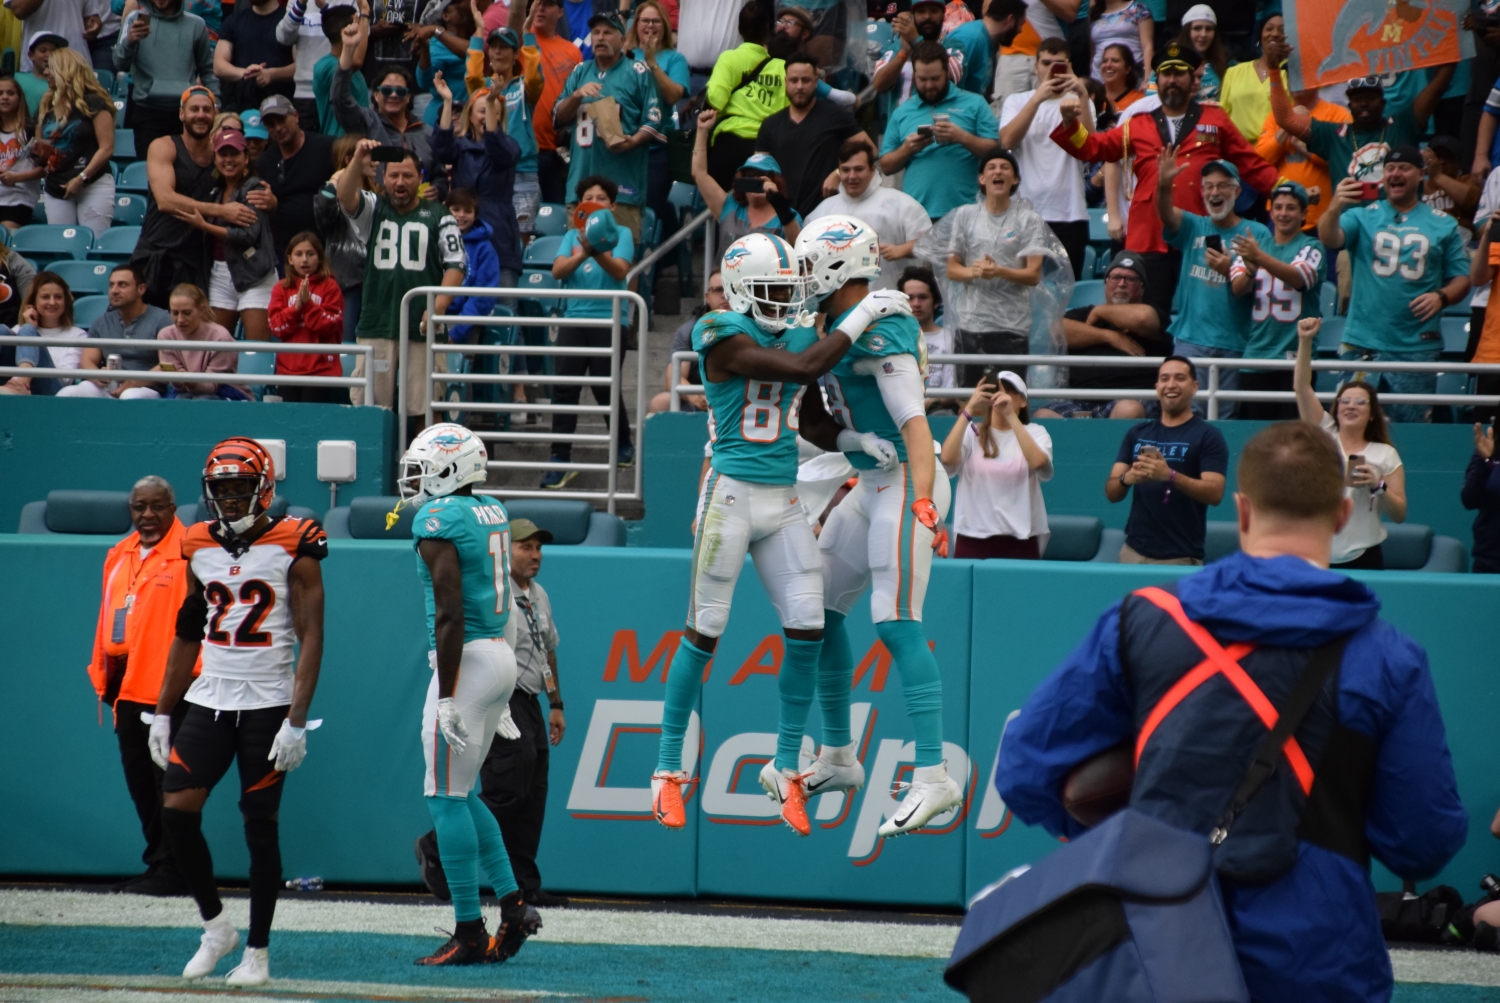 Dolphins celebrate after a touchdown against the Bengals. (Tony Capobianco for Five Reasons Sports)